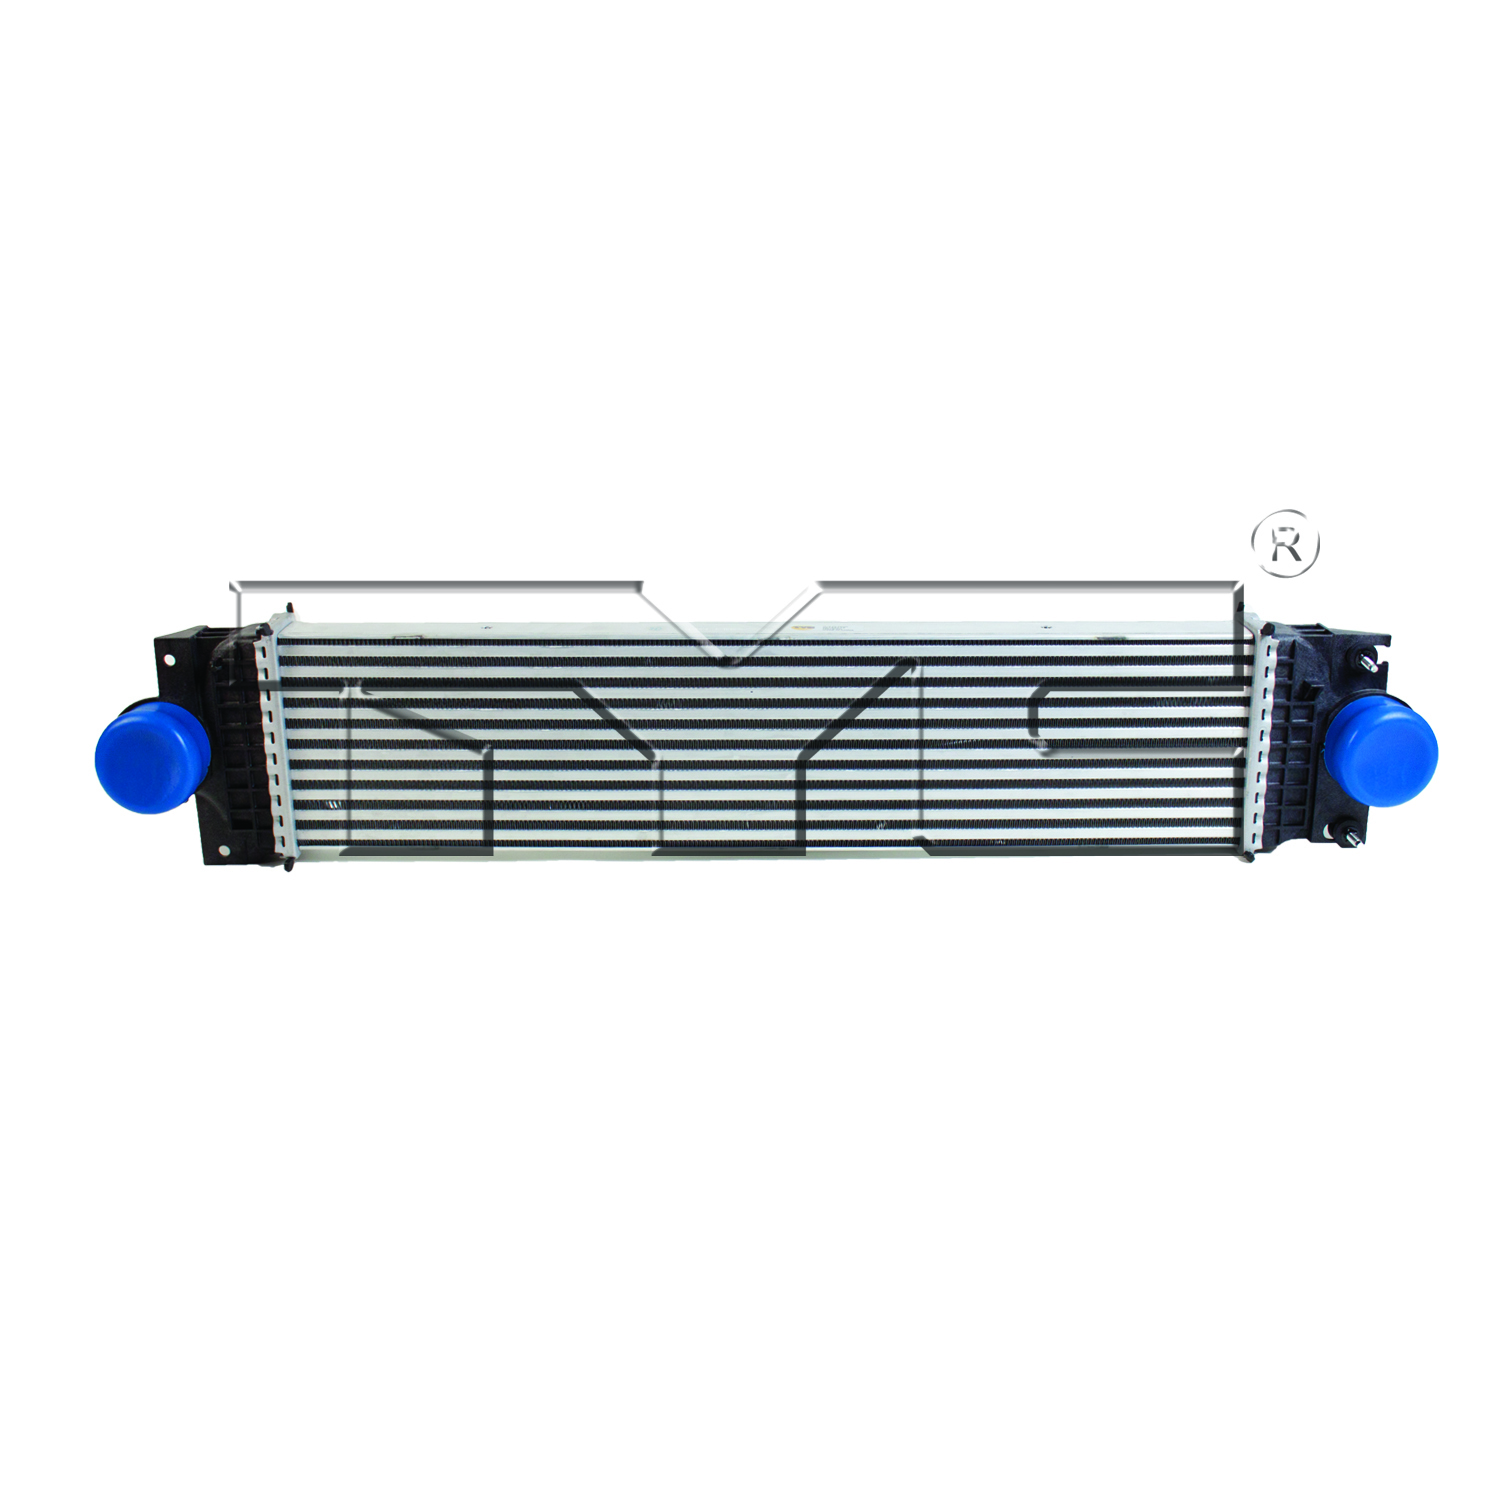 Aftermarket RADIATORS for FORD - FUSION, FUSION,13-16,Intercooler assy